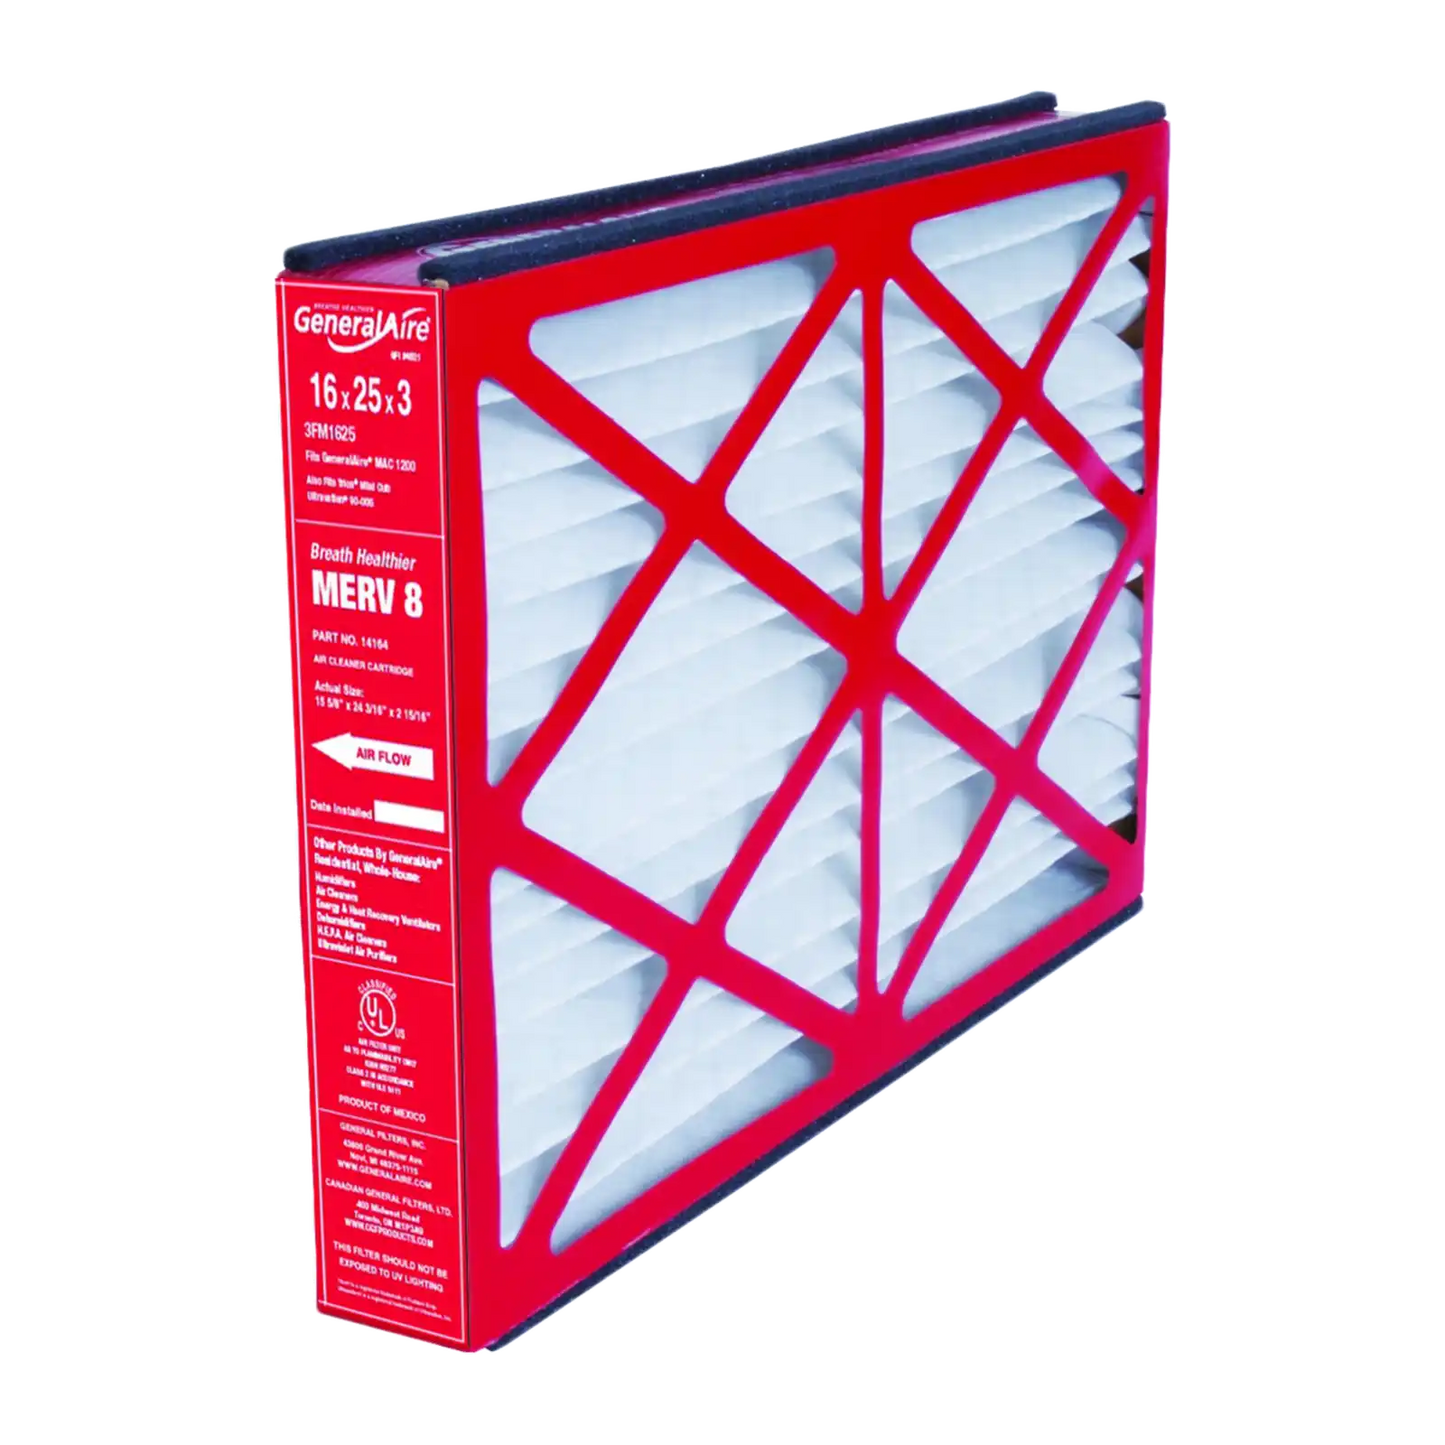 GeneralAire ReservePro 4521 16x25x3 Furnace Filter